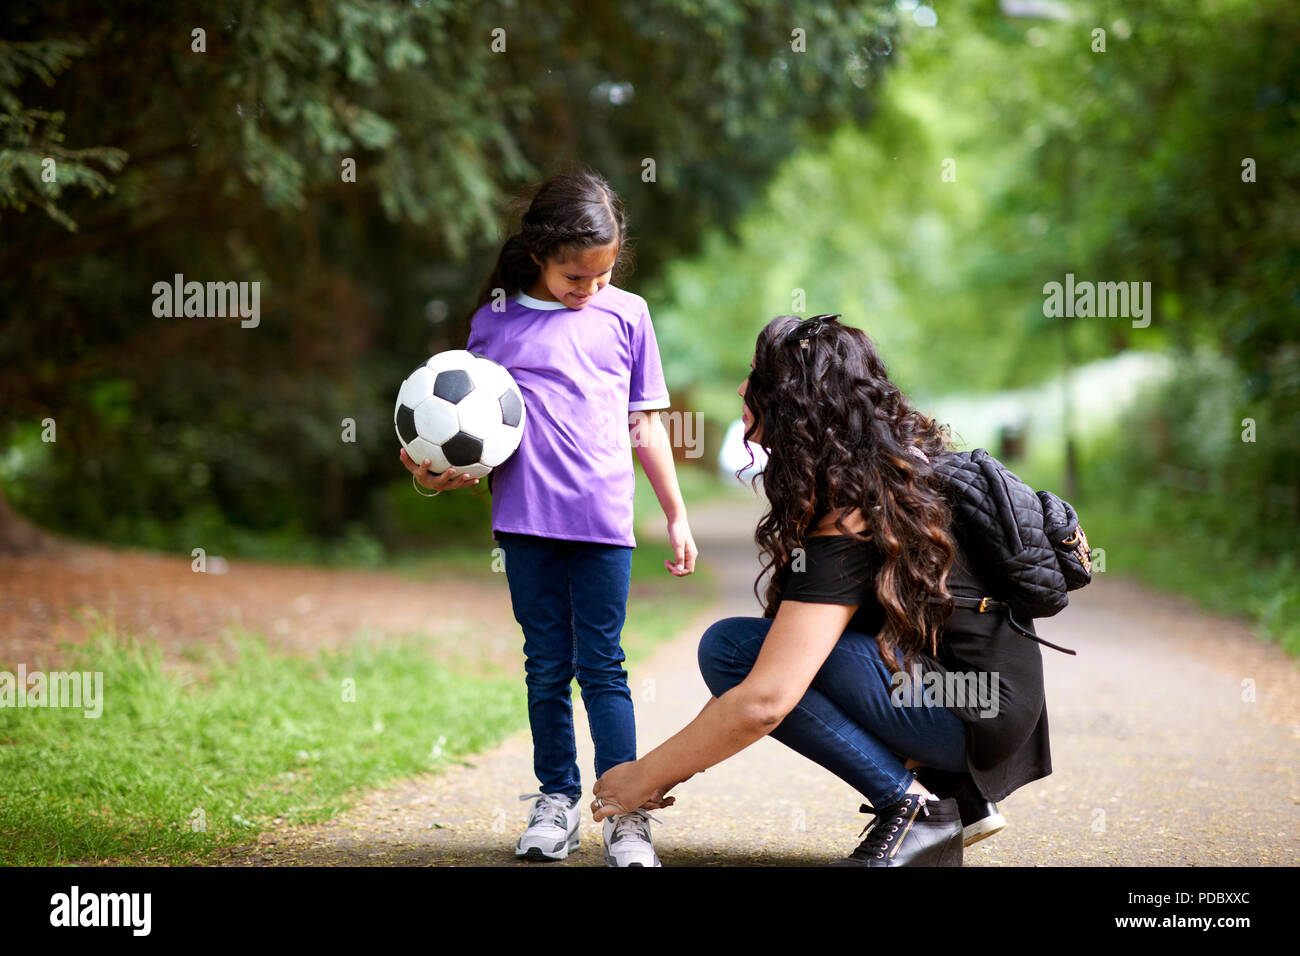 Mother tying shoelace of daughter holding soccer ball Stock Photo